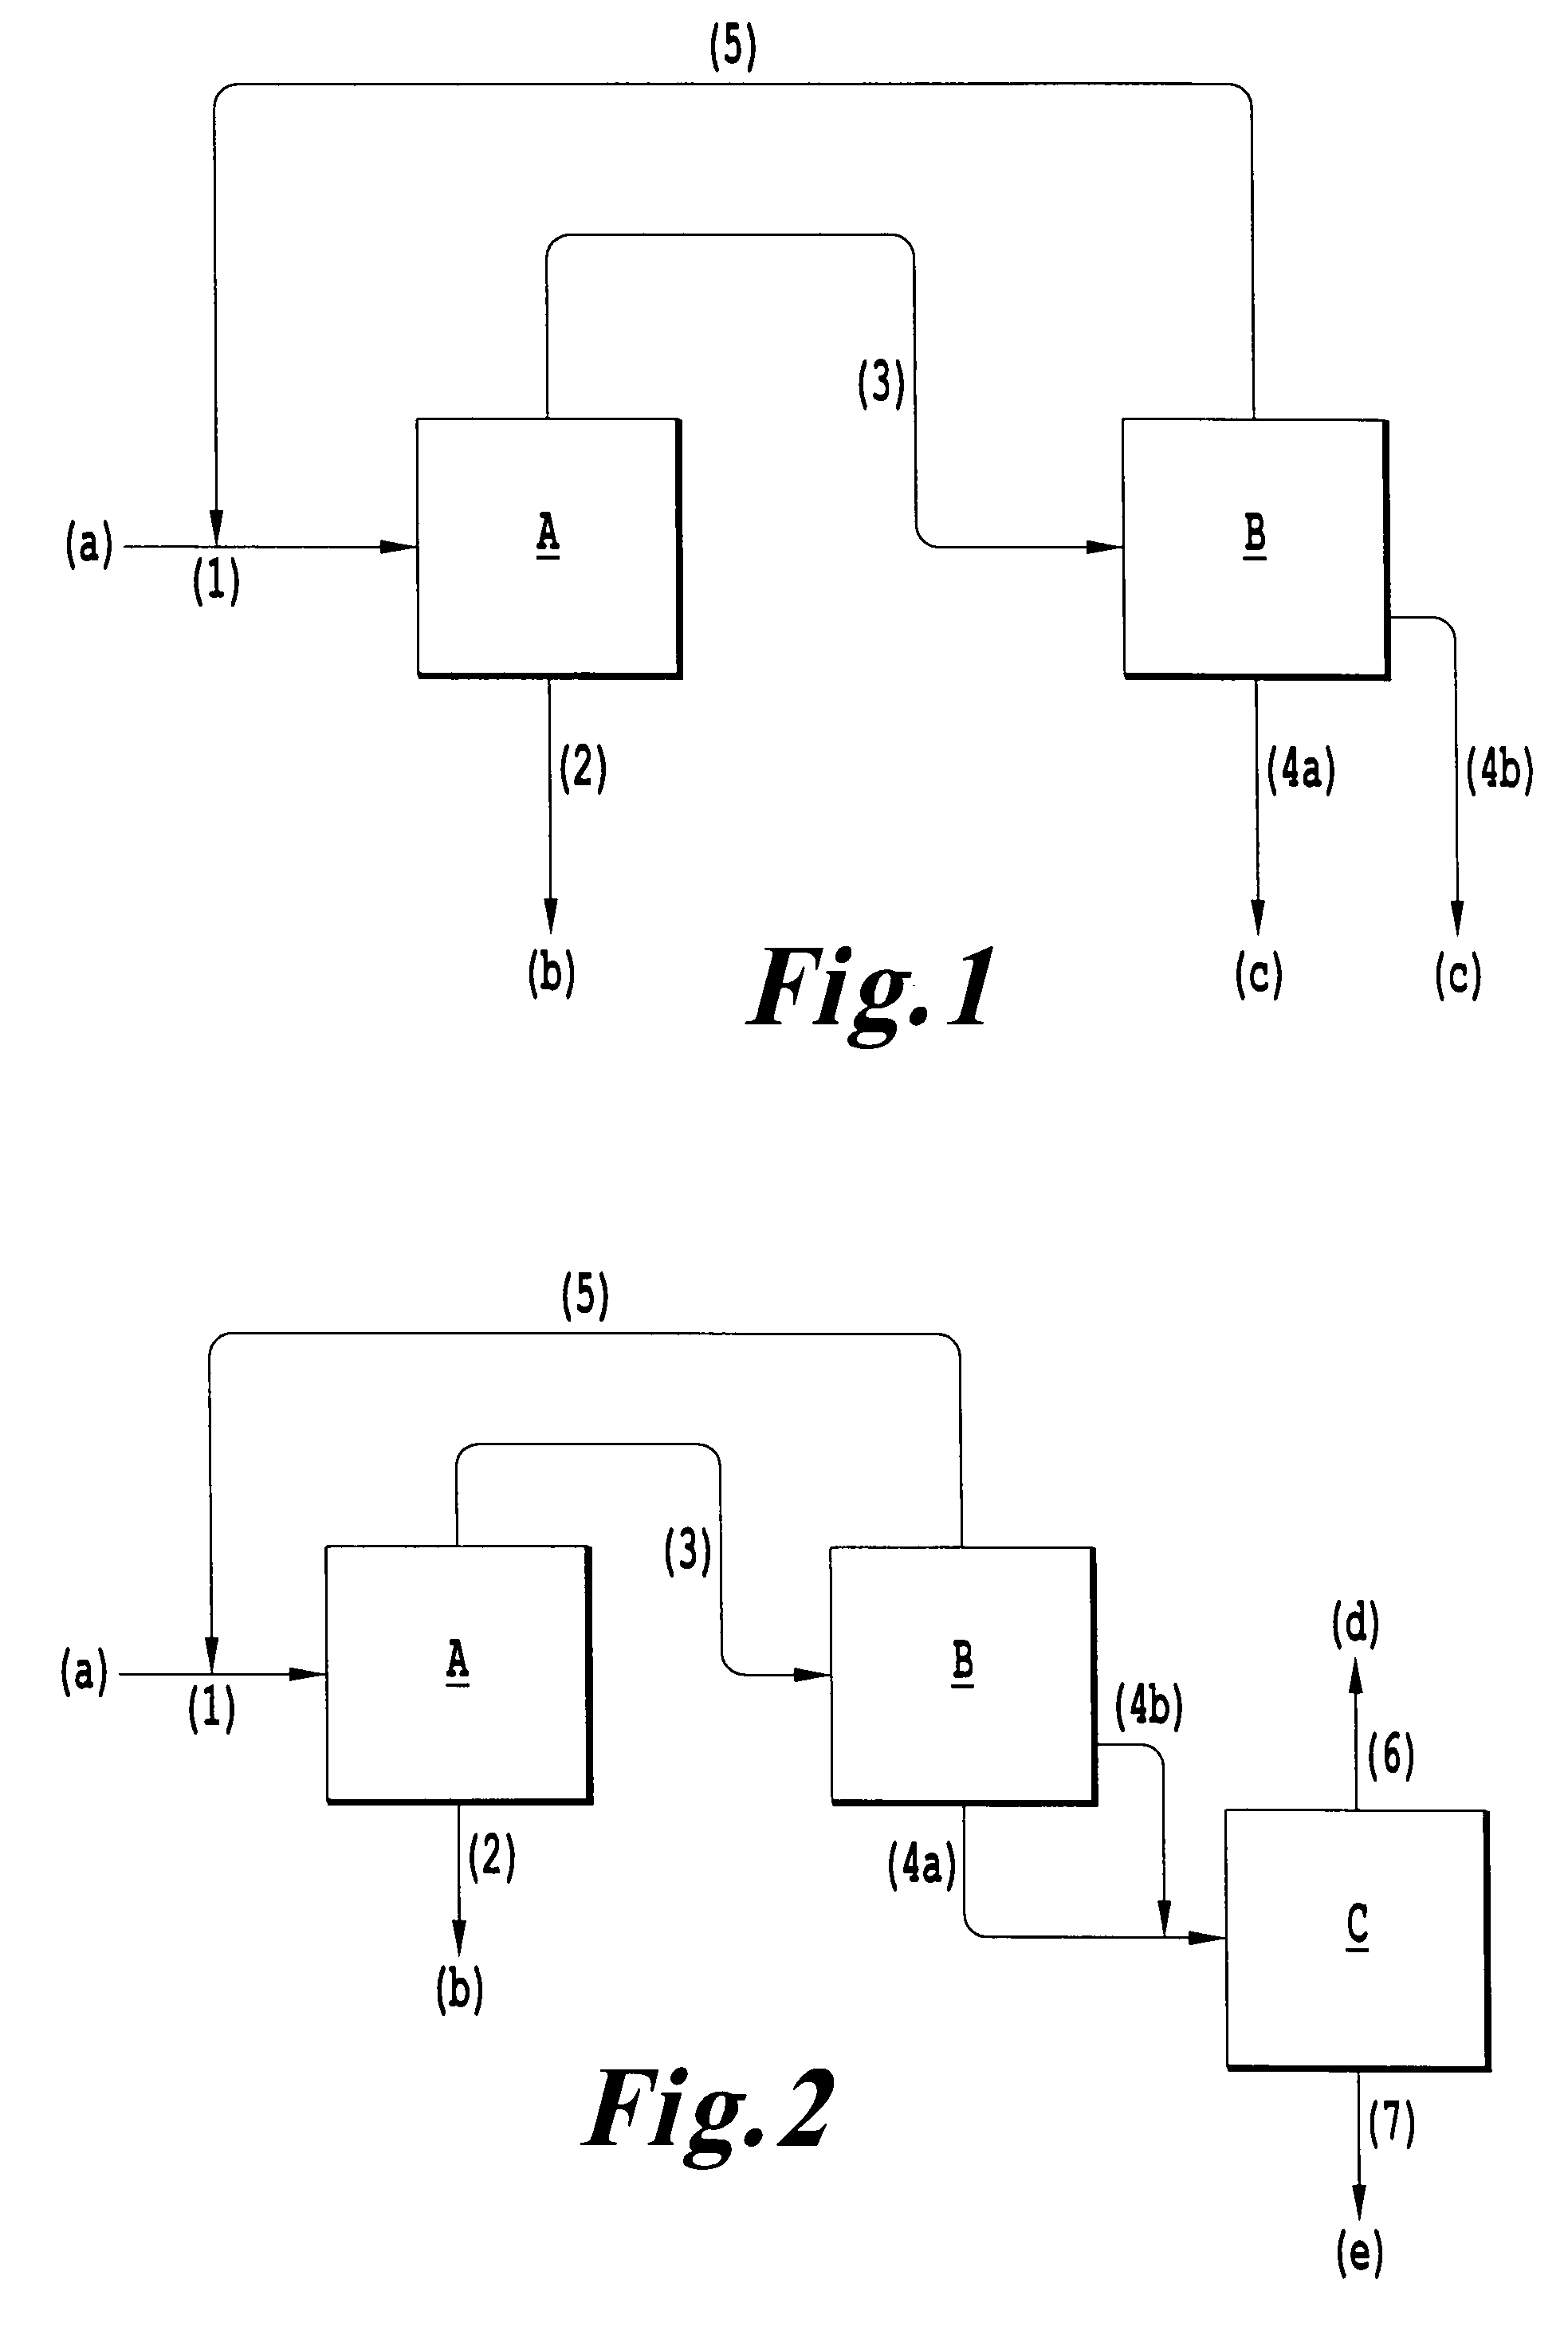 Method for the distillative separation of a mixture containing vinyl ether and alchol